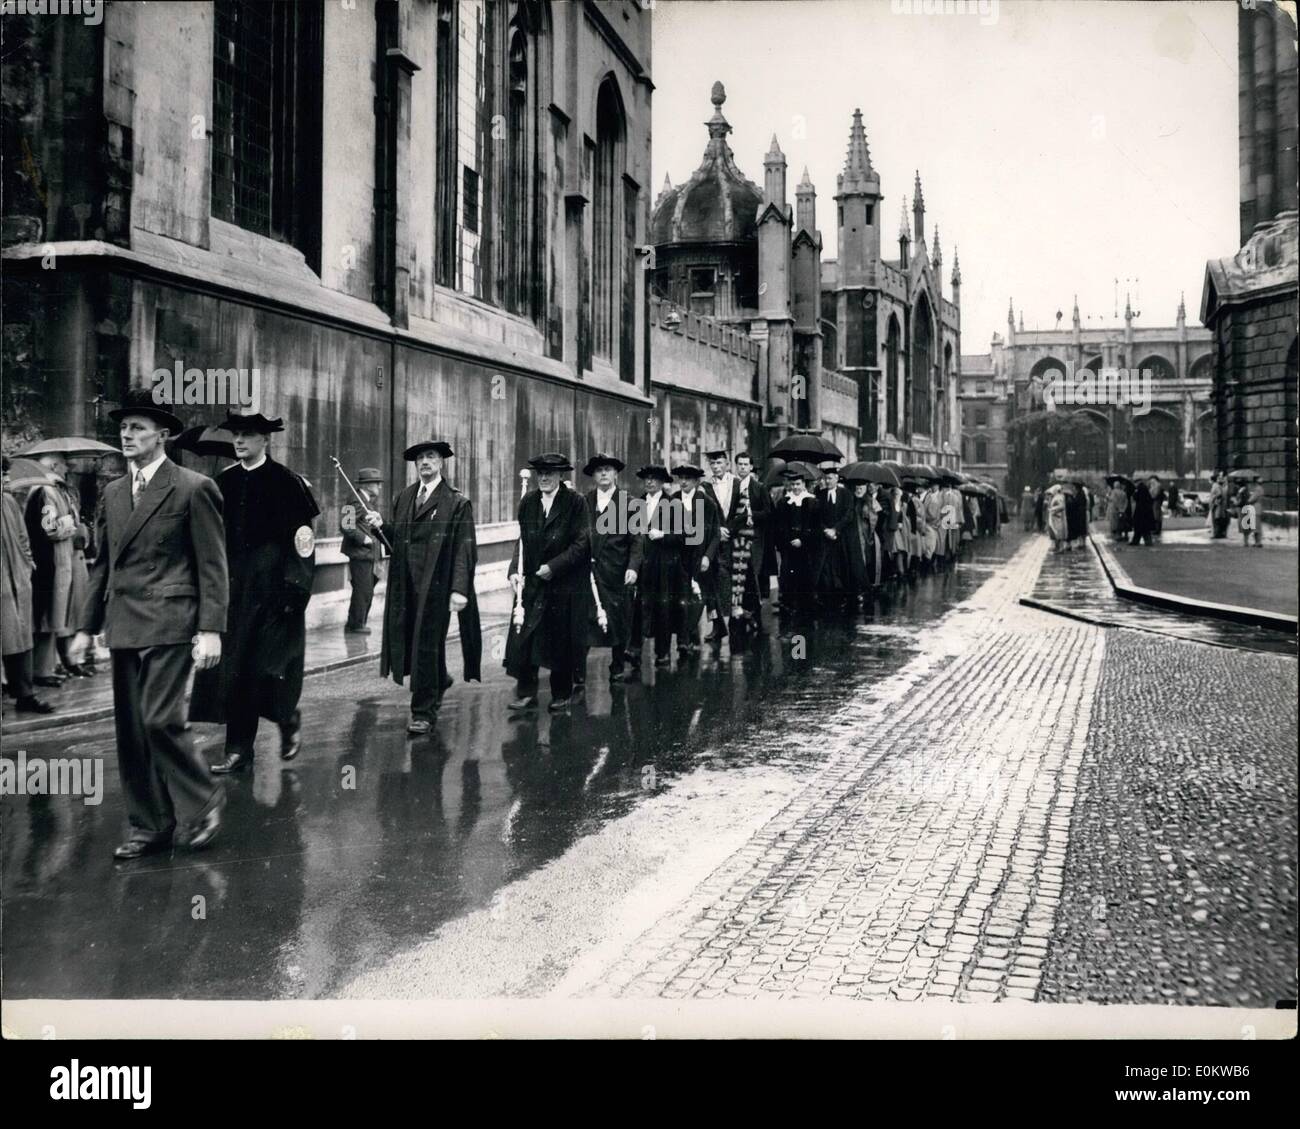 May 05, 1950 - Honorary Degrees at Oxford University. Keystone Photo Shows: The procession to the Encaenia at Oxford today for the presentation of Honorary Degrees of Dr. Civil Law (on Mr. J.W. Davis, ex U.S. Ambassador to London; and Dr. J.F. Mountford Vice Chancellor of Liverpool University) and Degrees of Dr. of Letters on Mr. Walter de La Mare the poet and Mr. R.H. Tawney Hon. Fellow of Balliol. Stock Photo